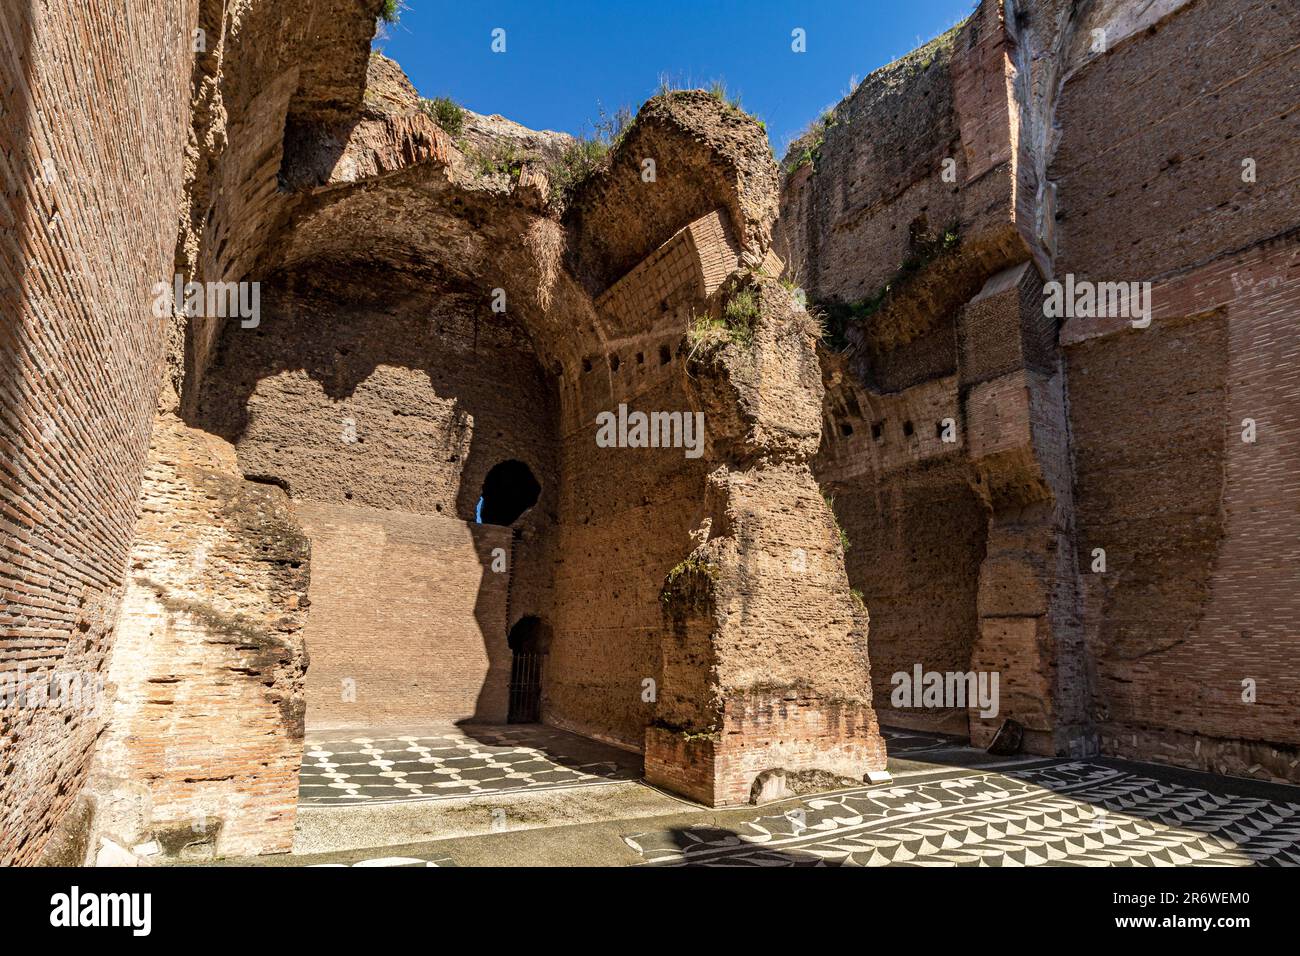 Richly decorated floor mosaics at The Baths Of Caracalla, The Baths of Caracalla were the second-largest ancient thermae in Rome, Italy Stock Photo